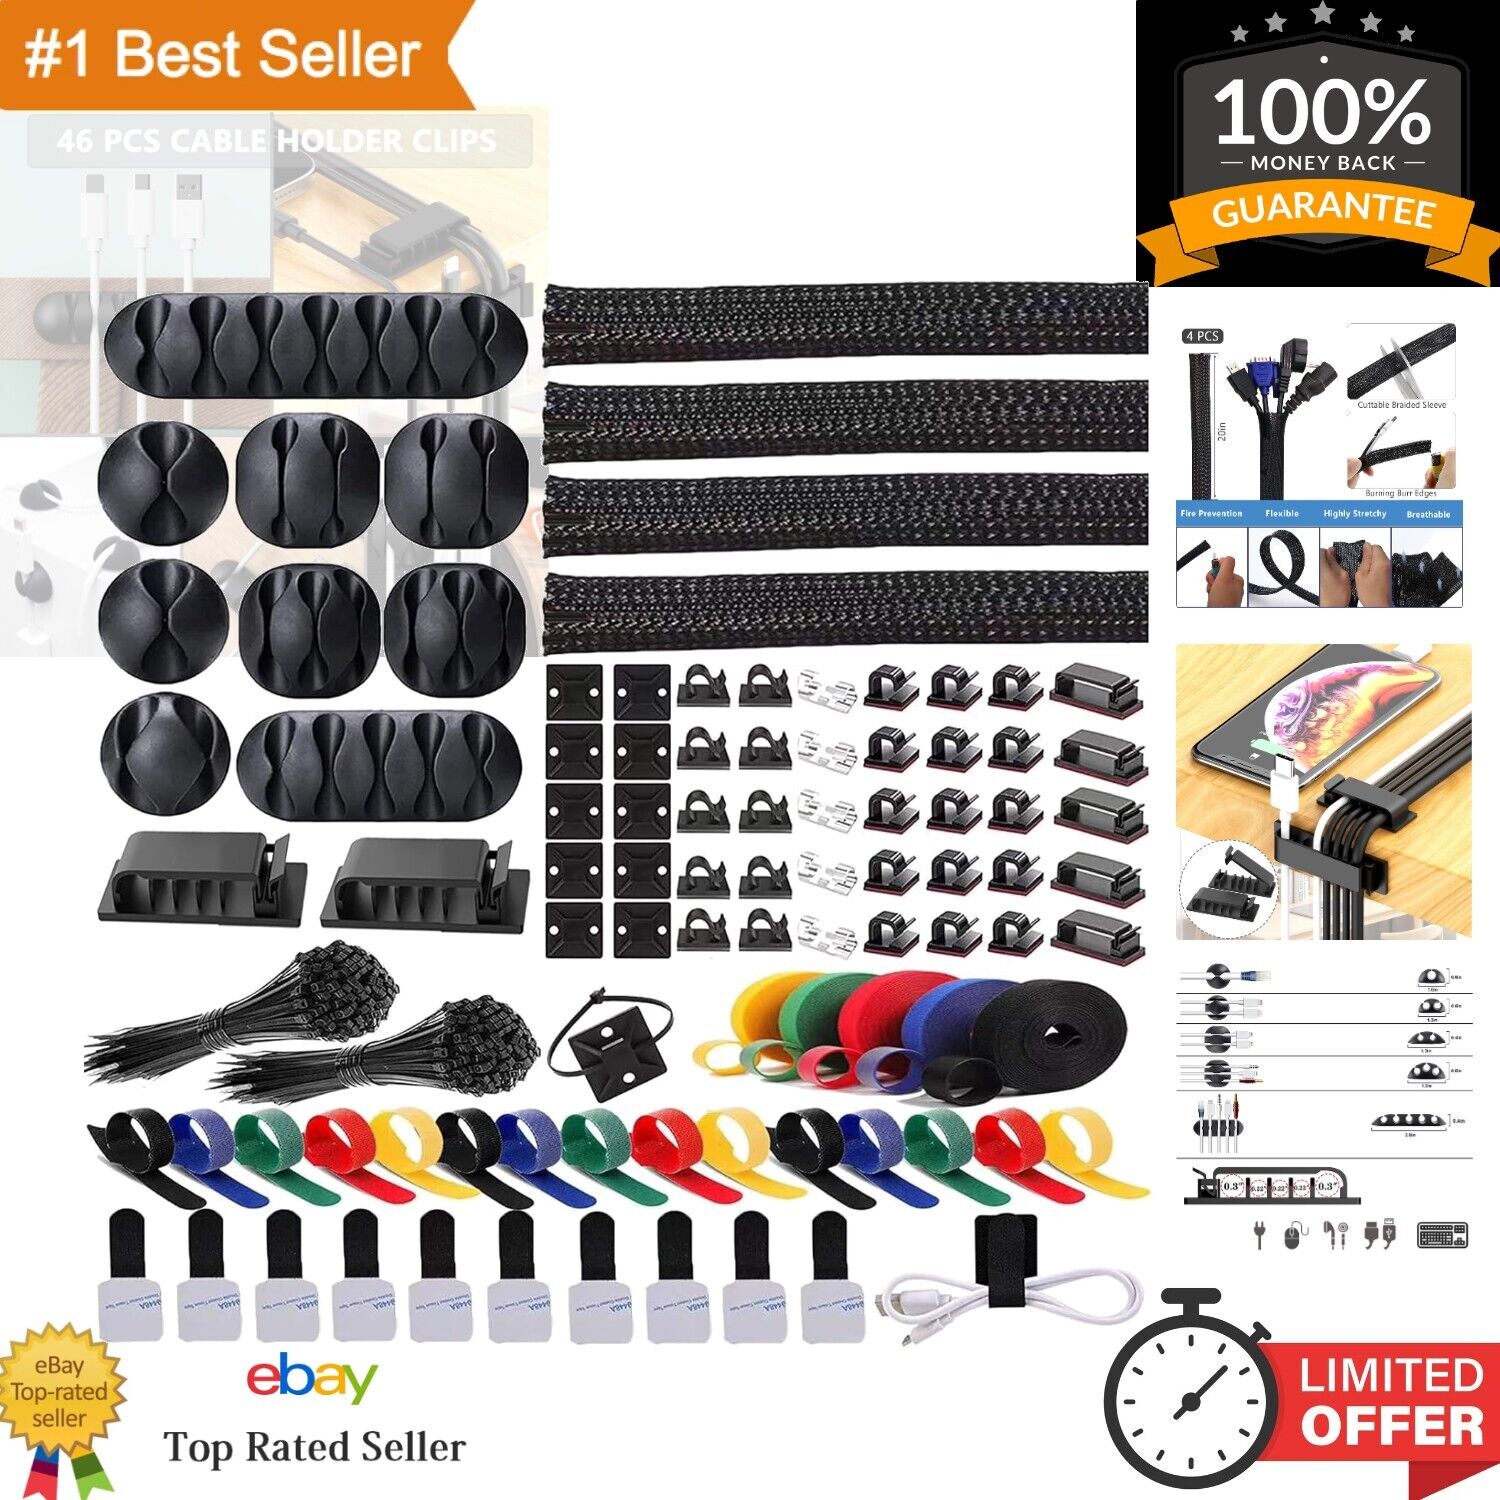 300PCS Cable Management Kit - Cord Protector, Cable Clips, Fastening Ties & More